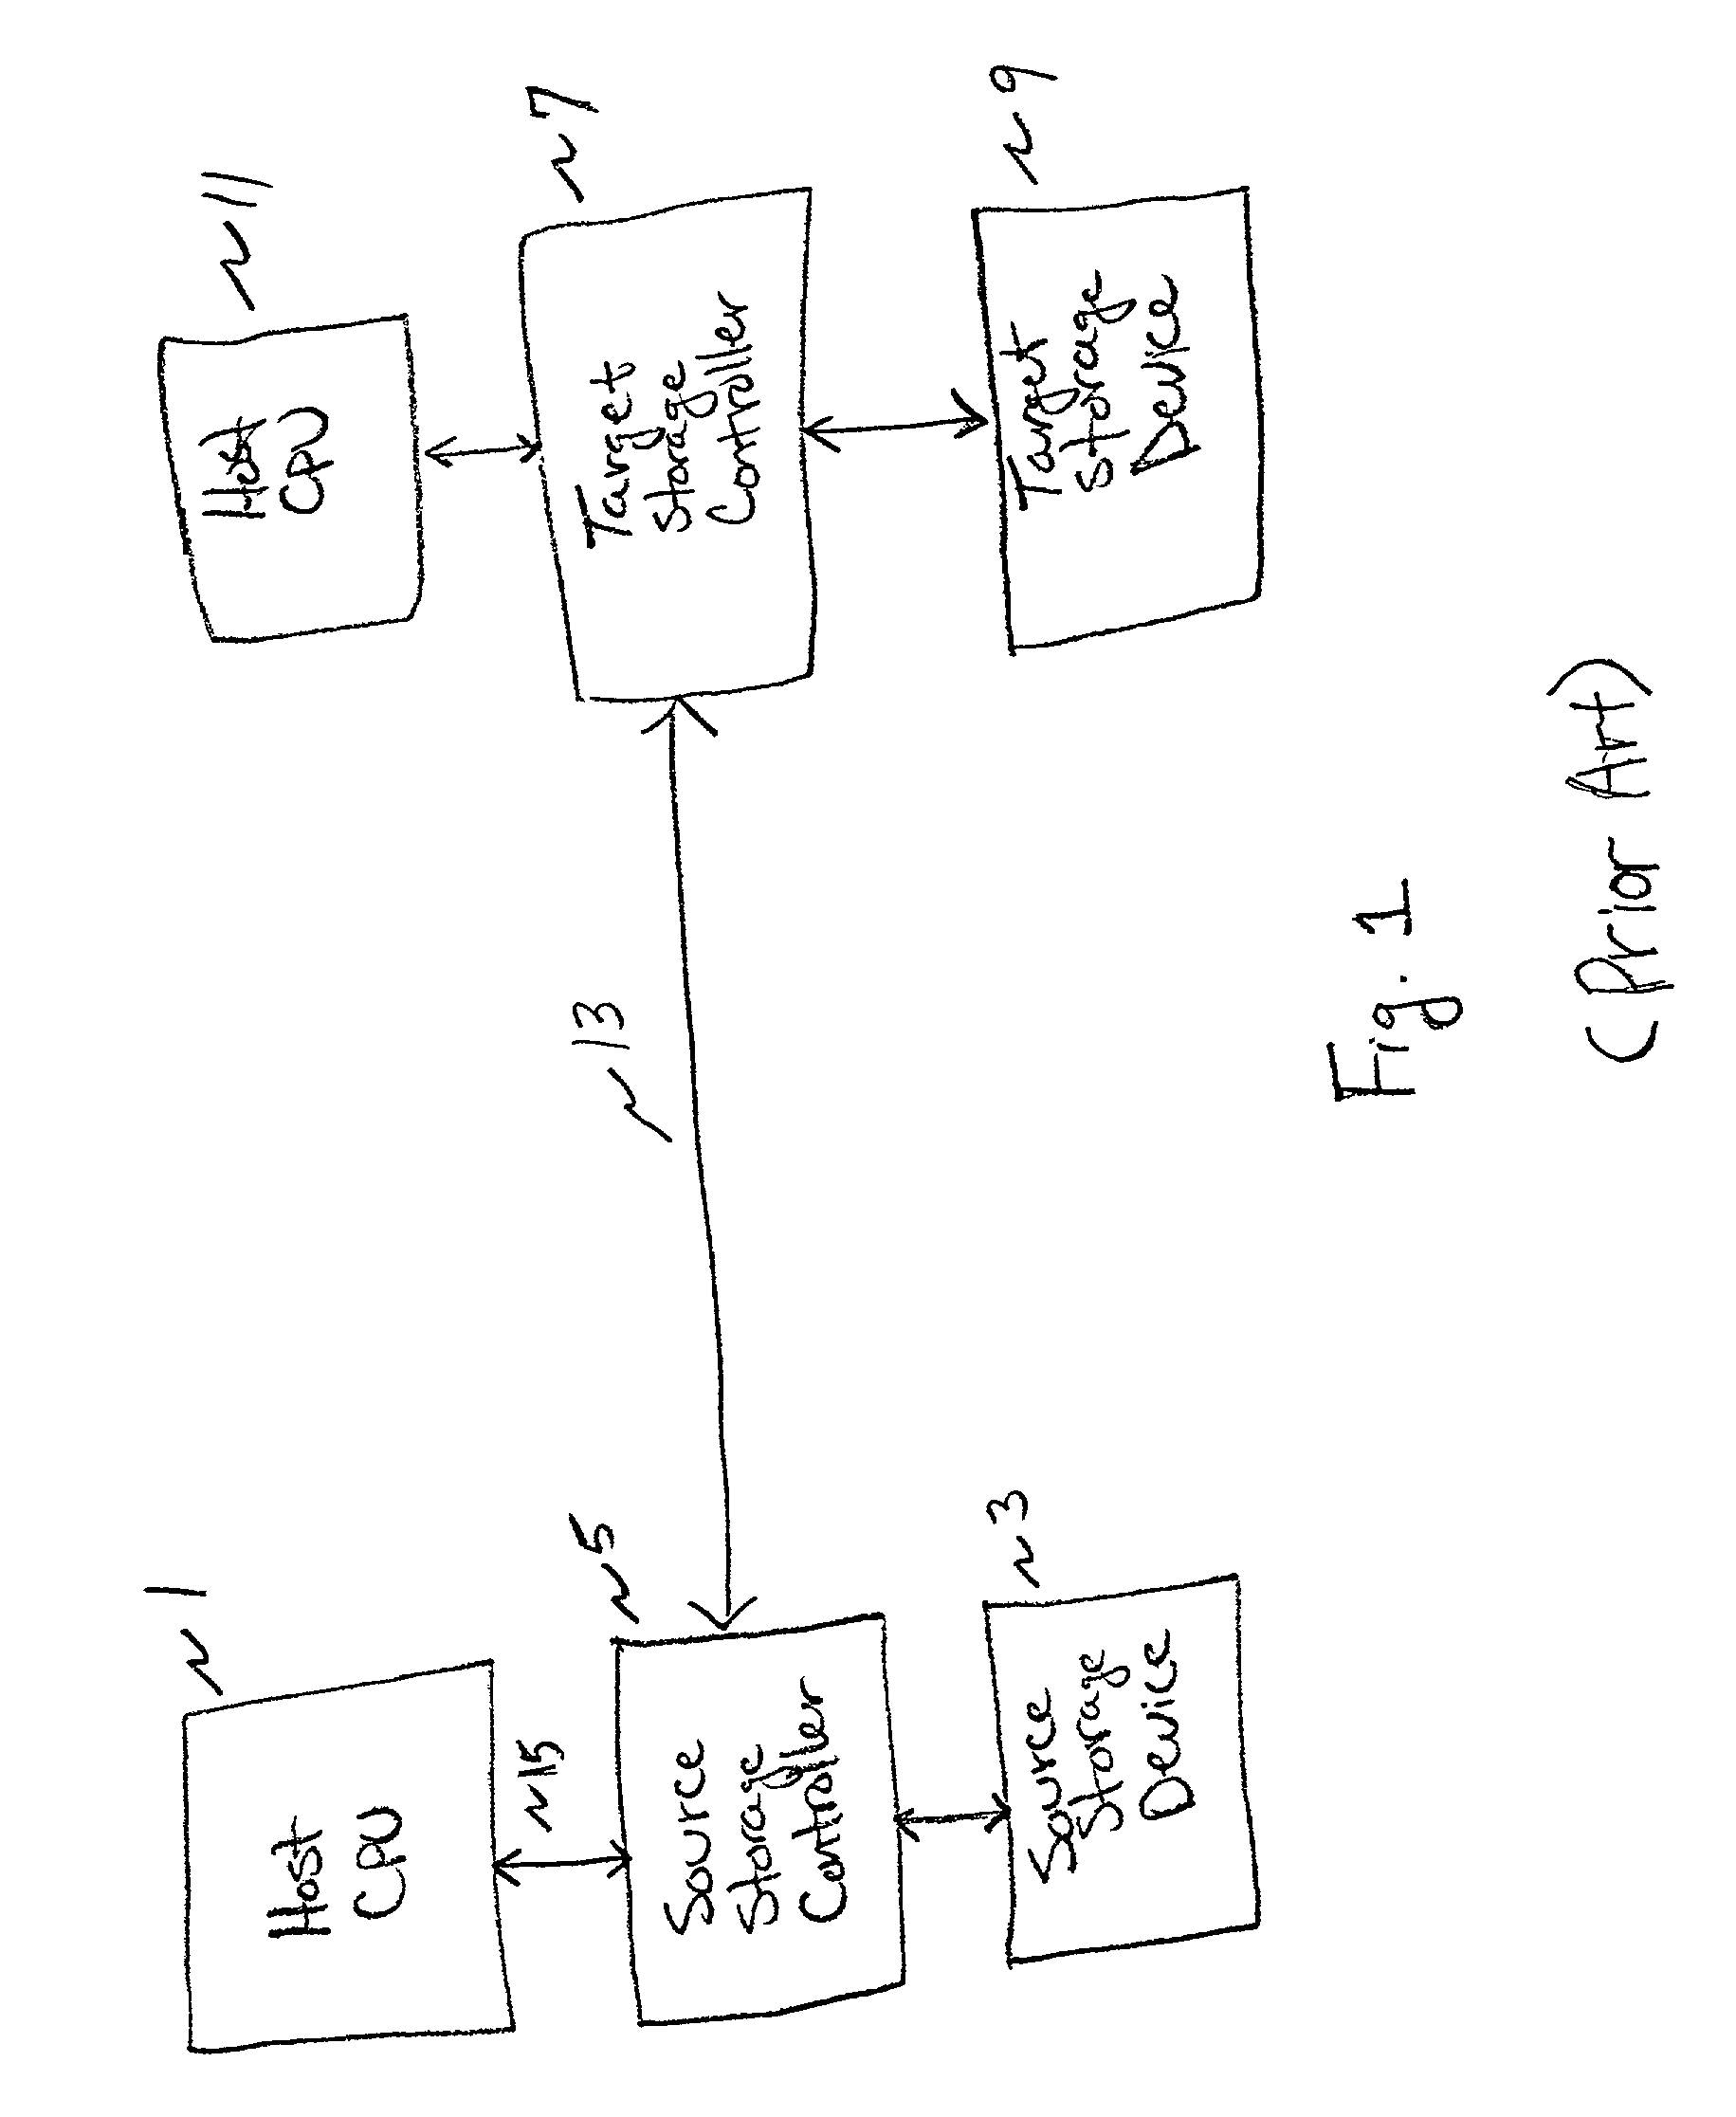 Method and apparatus for implementing a remote mirroring data facility without employing a dedicated leased line to form the link between two remotely disposed storage devices